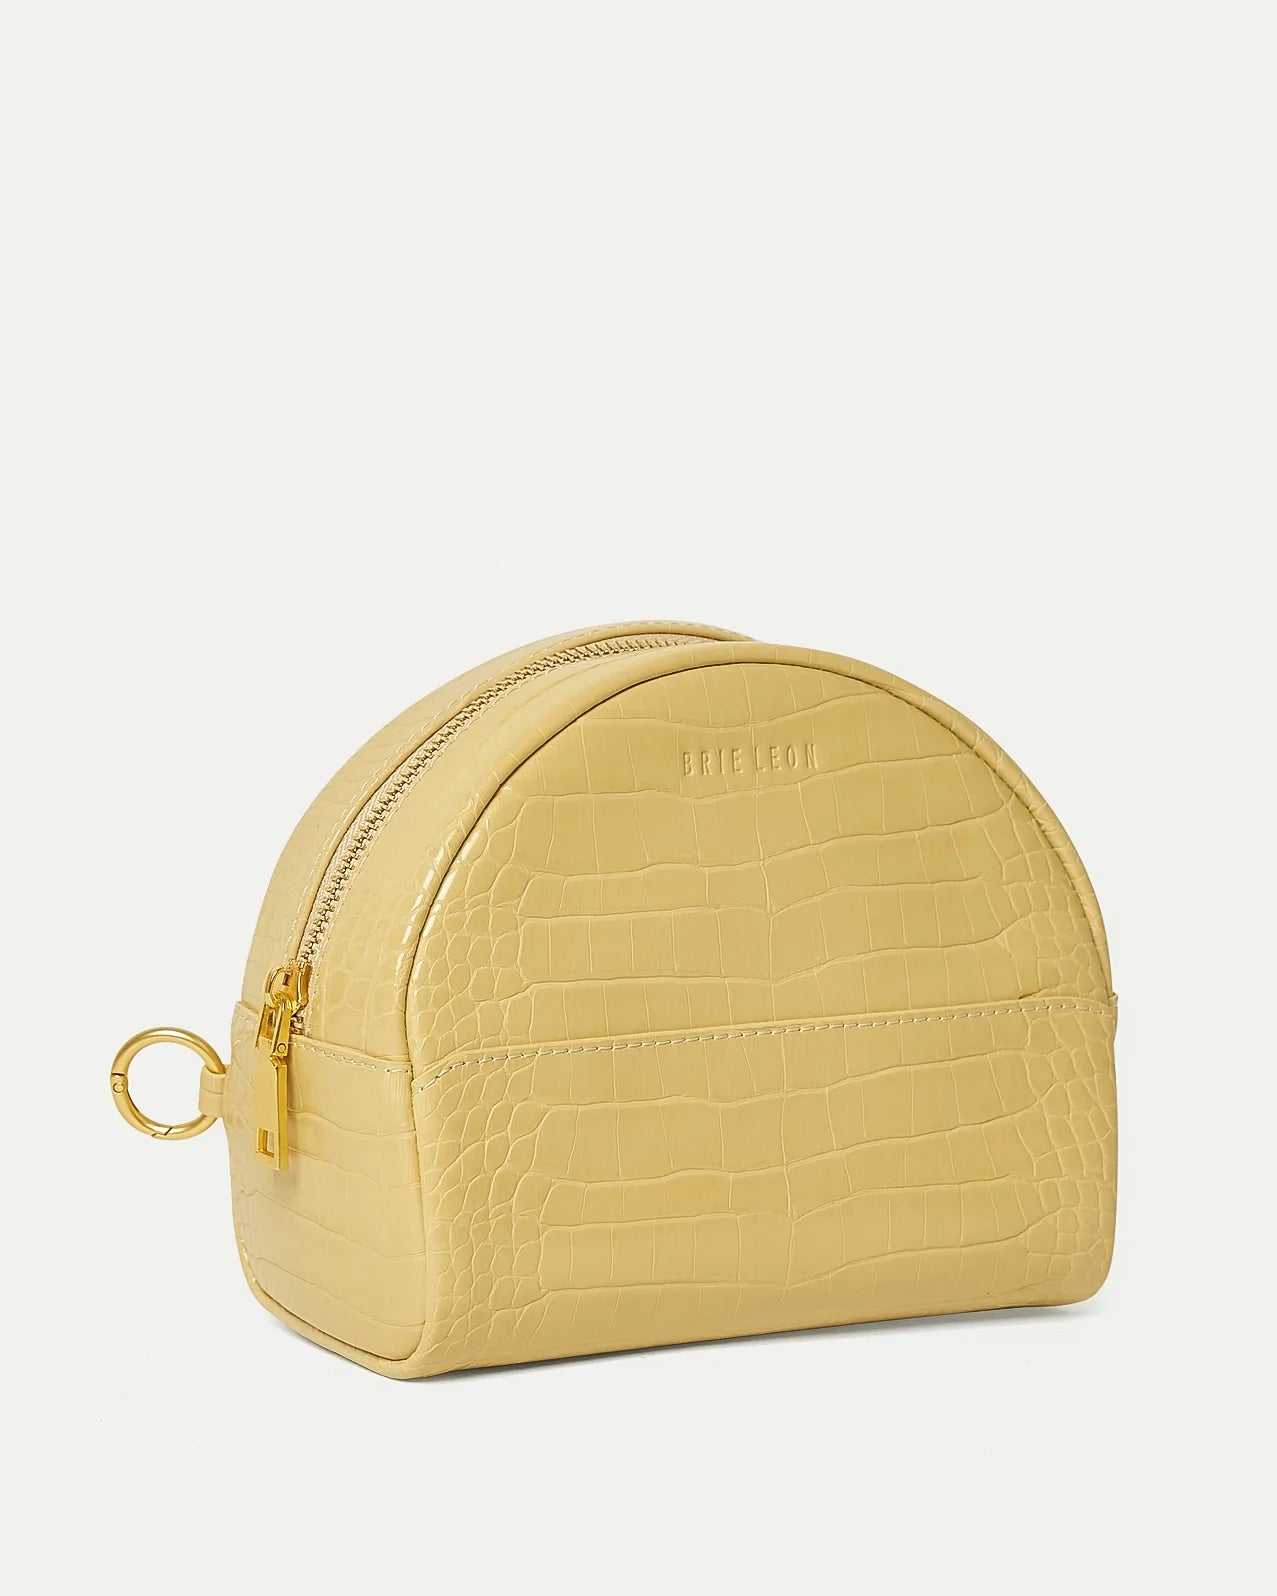 BRIE LEON // Circulo Essentials Pouch BUTTERMILK BRUSHED RECYCLED CROC